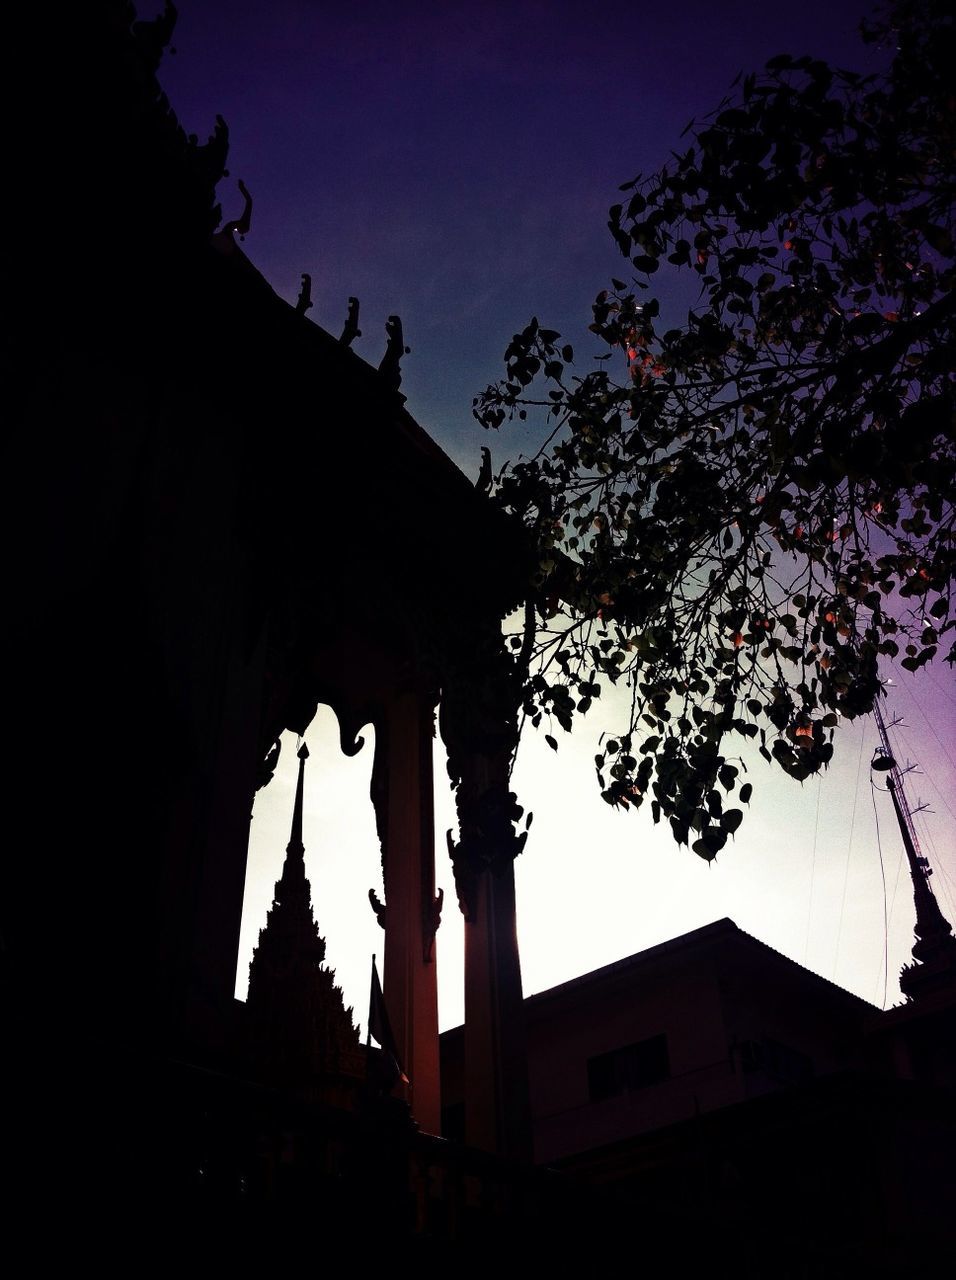 low angle view, architecture, built structure, building exterior, silhouette, tree, clear sky, sky, religion, place of worship, spirituality, dusk, outdoors, temple - building, growth, no people, history, night, nature, building